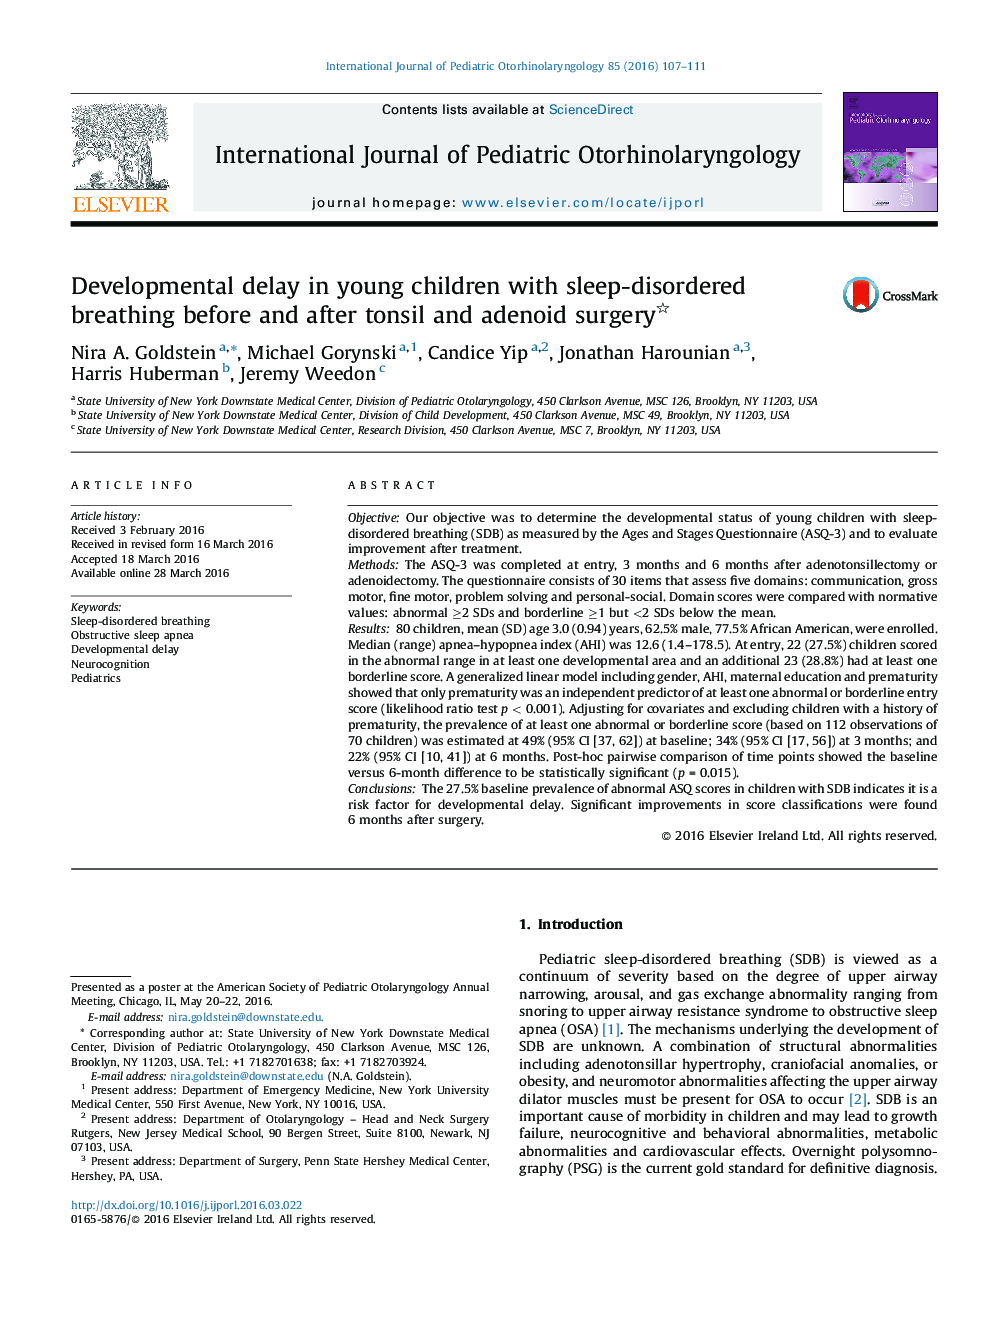 Developmental delay in young children with sleep-disordered breathing before and after tonsil and adenoid surgery